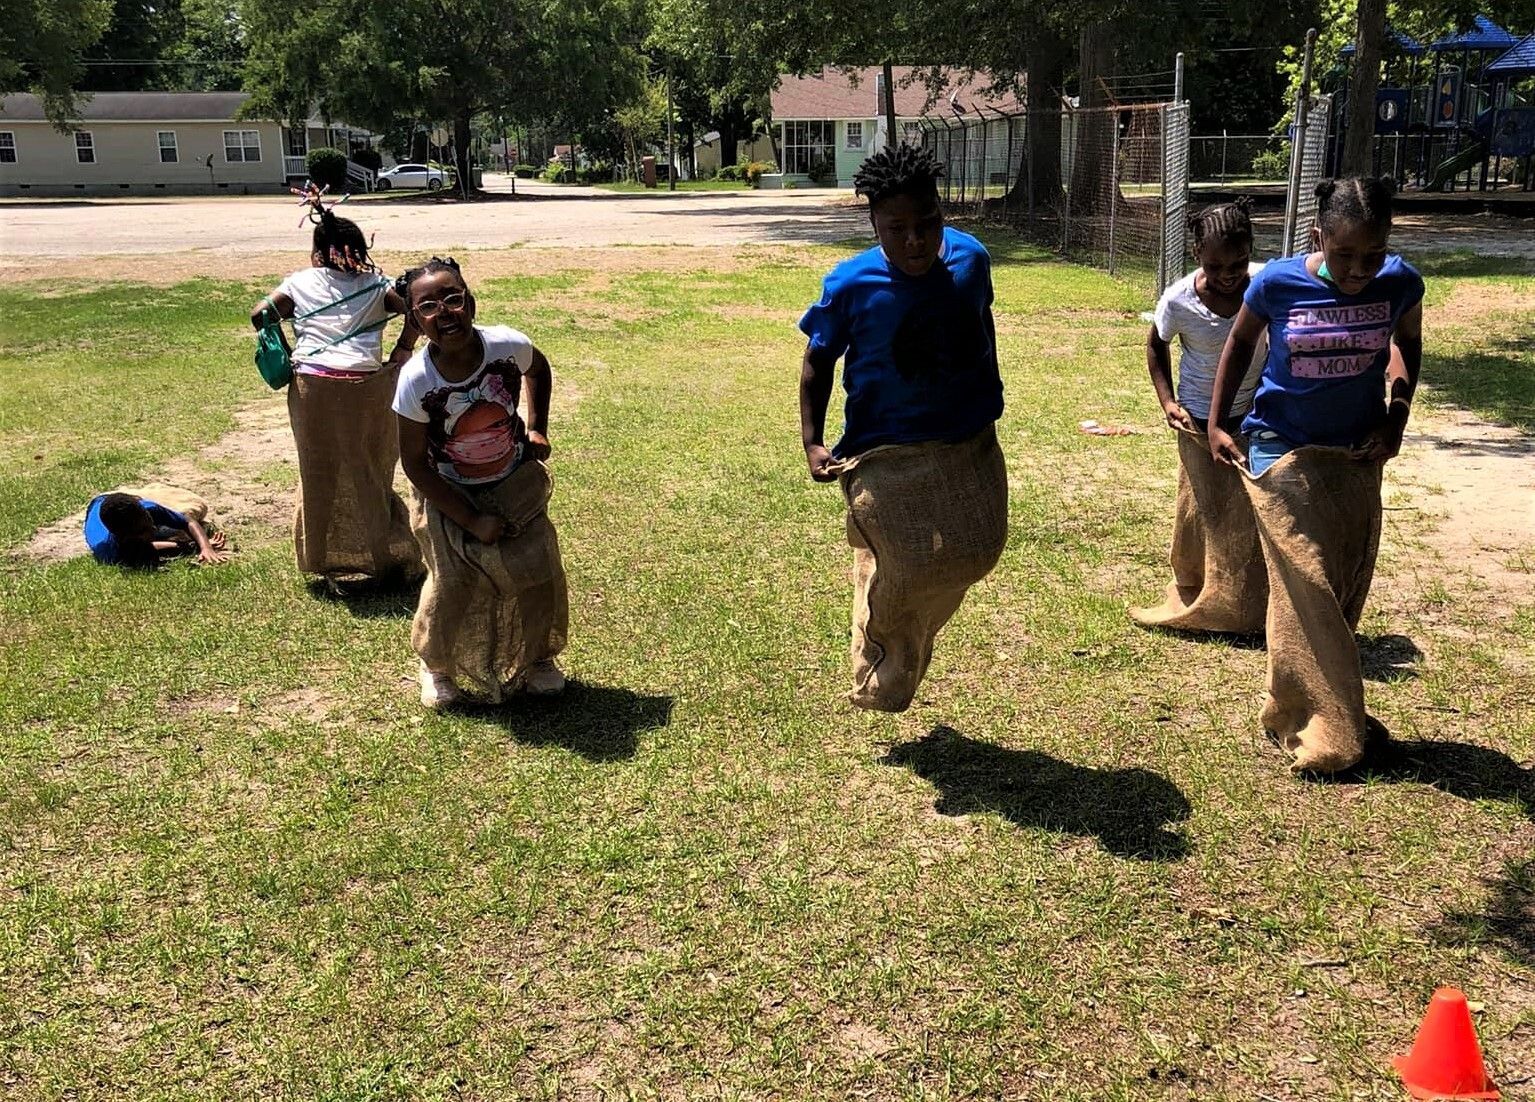 Kids participating in a sack race